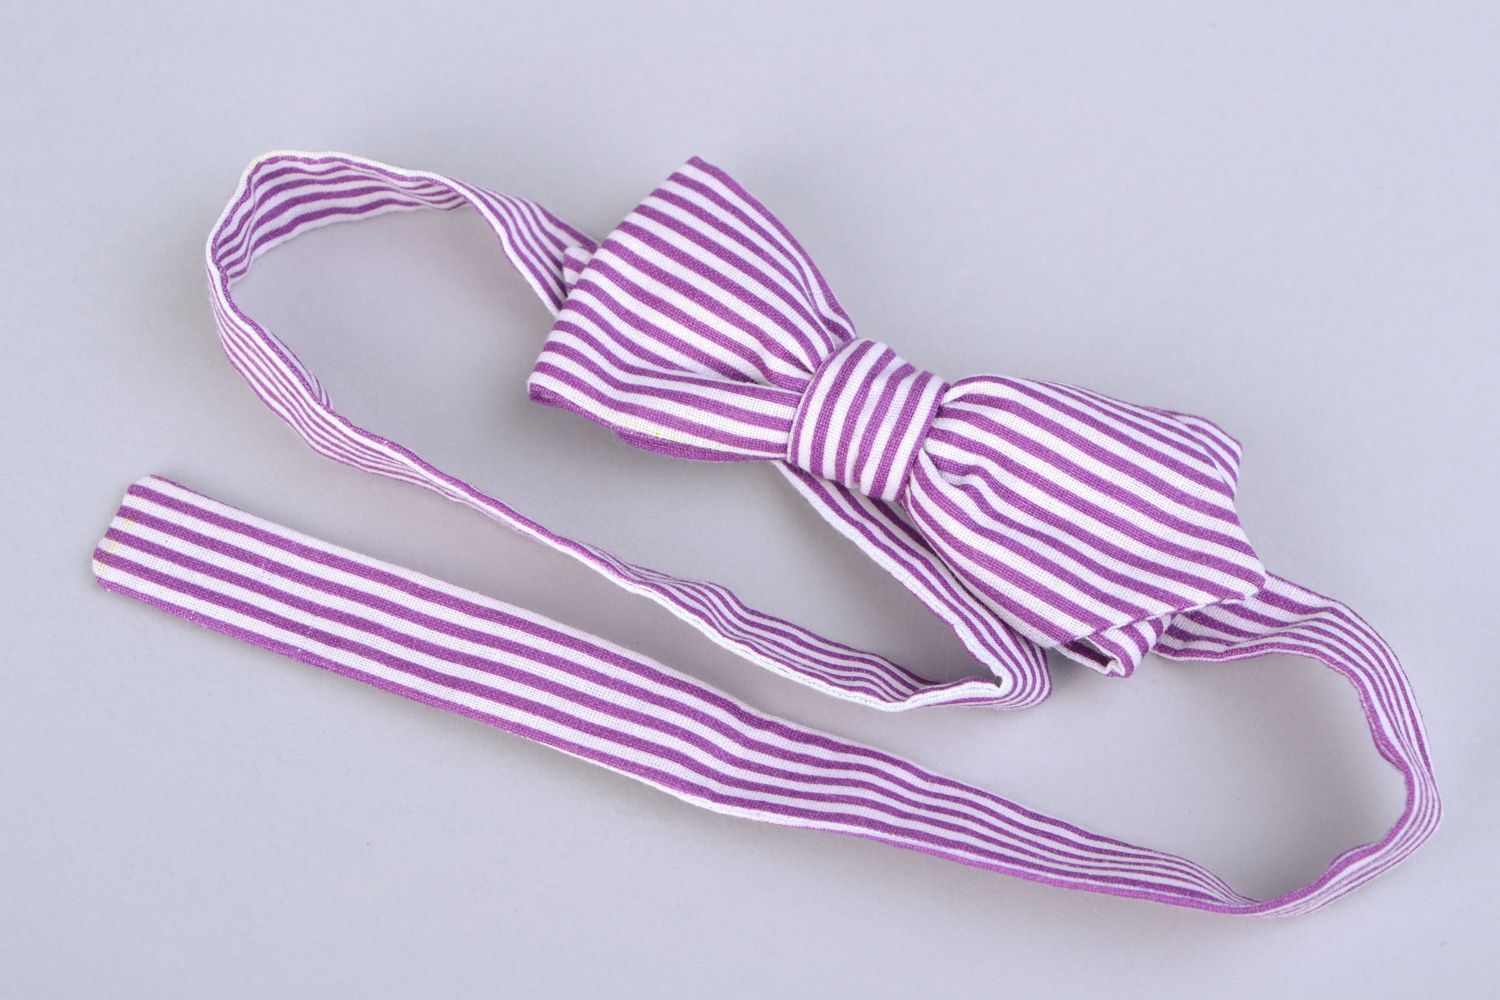 Handmade designer bow tie sewn of striped white and violet cotton fabric for men photo 5